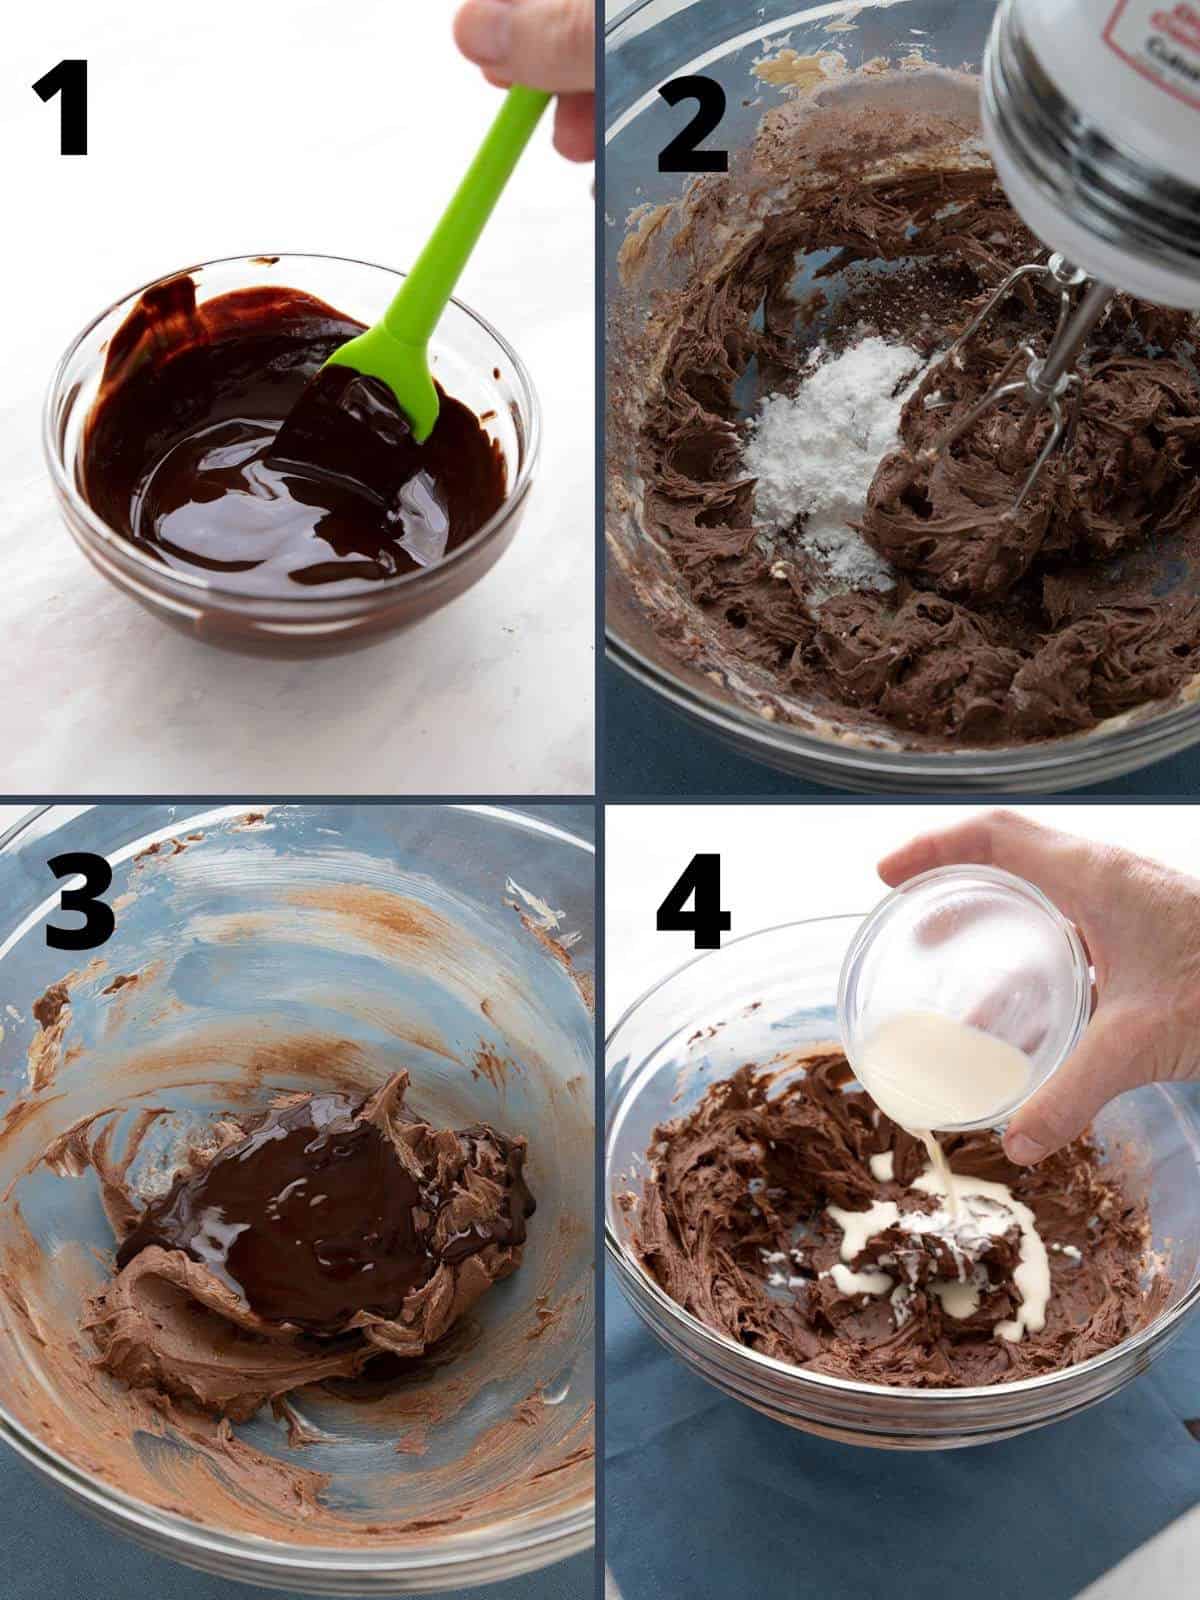 A collage of four images showing the steps for keto chocolate frosting. 